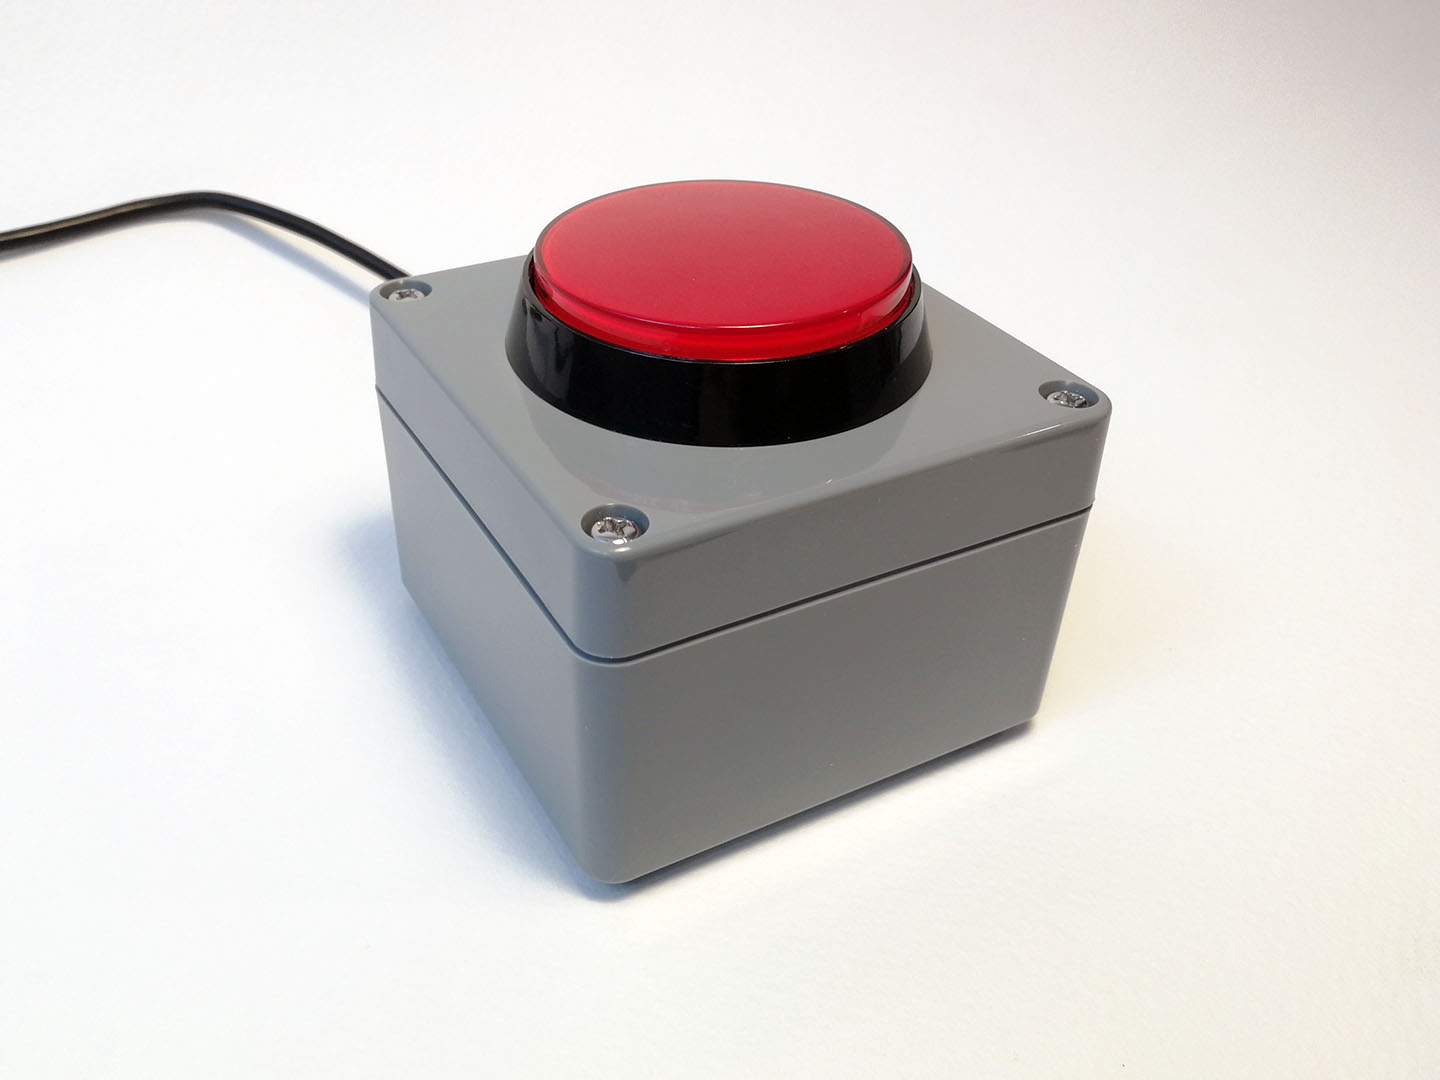 A Big Red Button Acting as a Keyboard Using Arduino